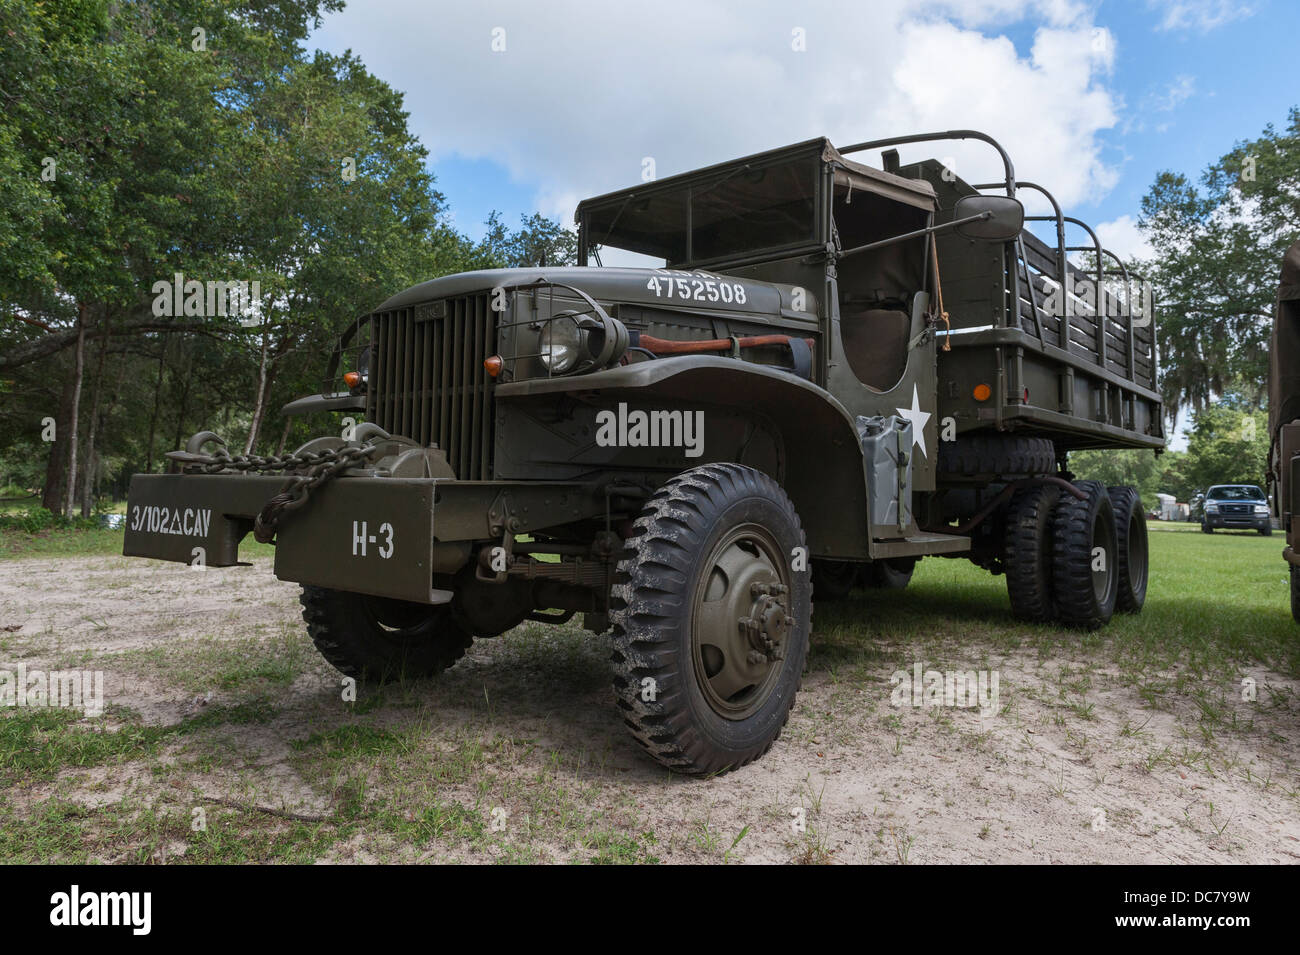 Restored Military vehicle located in Marion County Florida at a Military club meet. Stock Photo